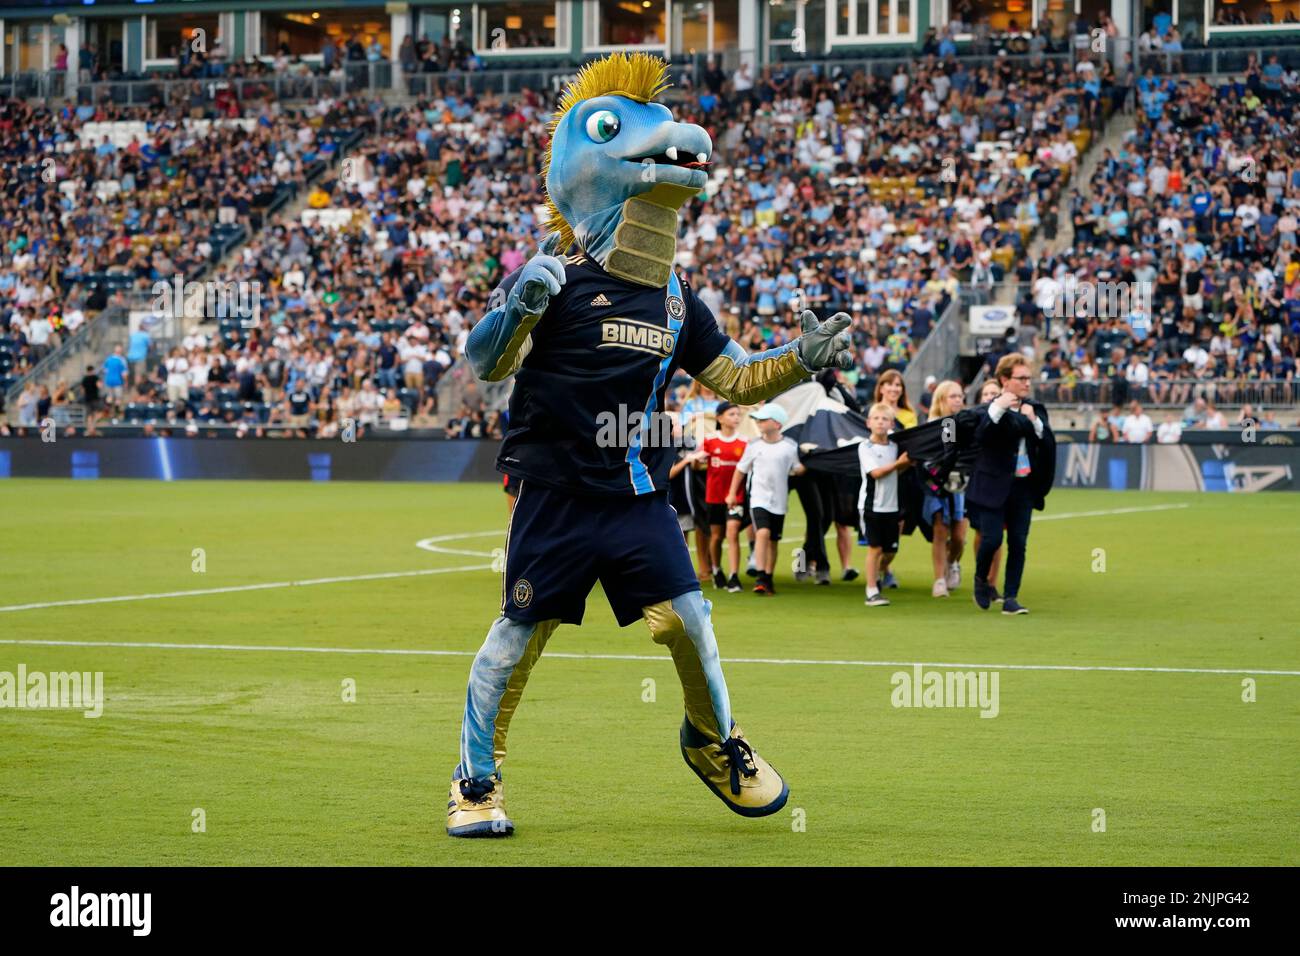 The Philadelphia's unveil Phang, the soccer team's first mascot